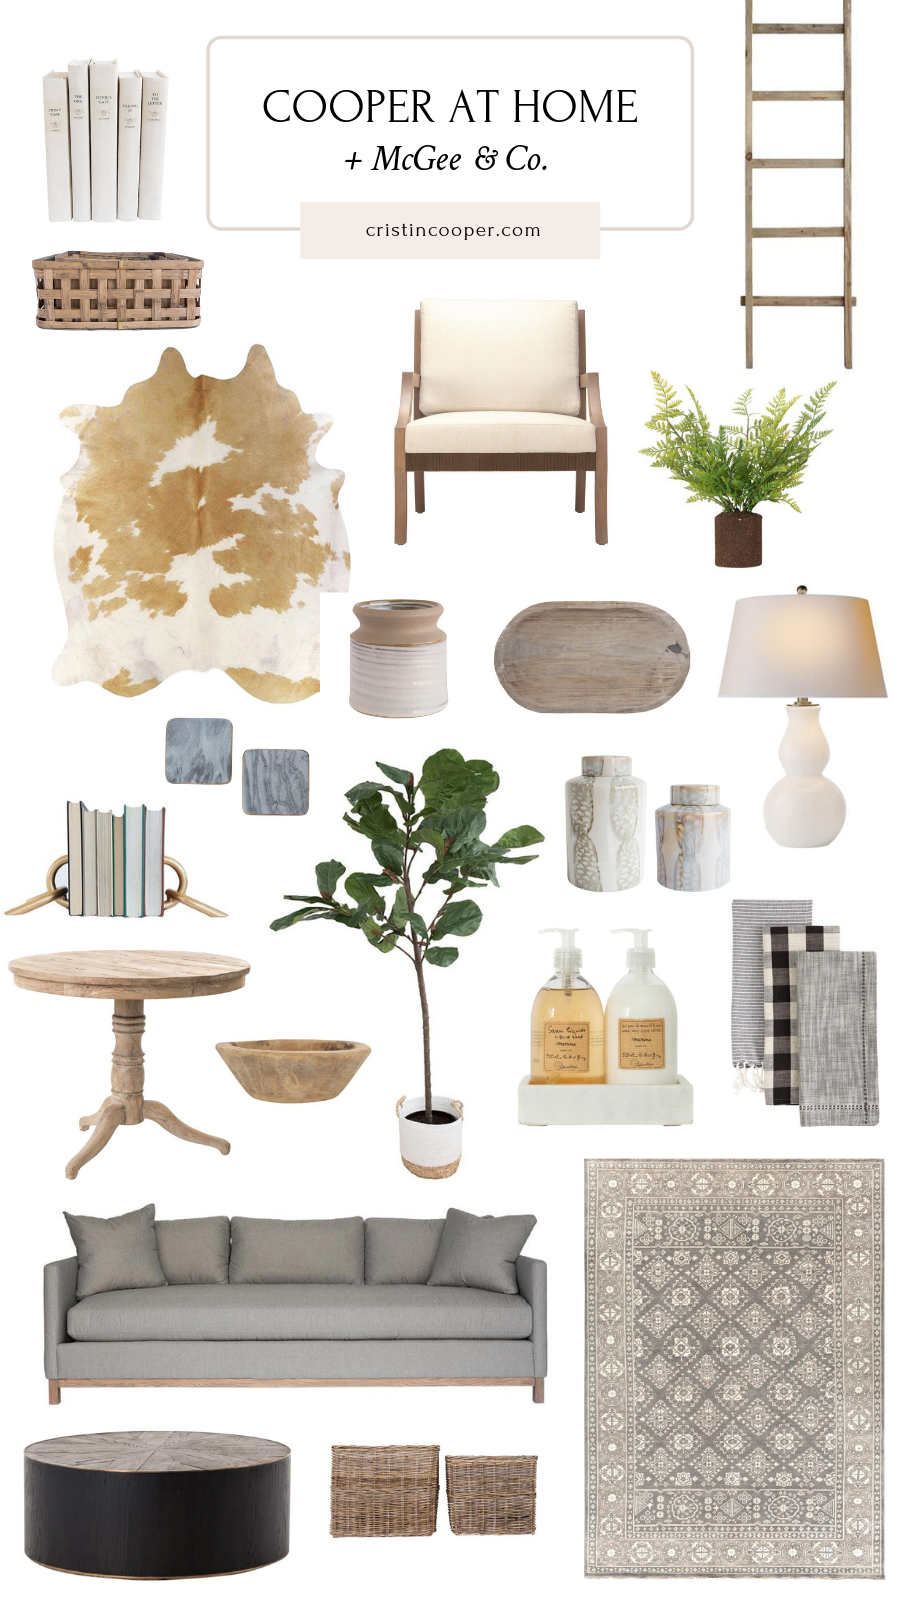 Cooper at Home, Home Decor, Sale, McGee and Co, Furniture, Decor